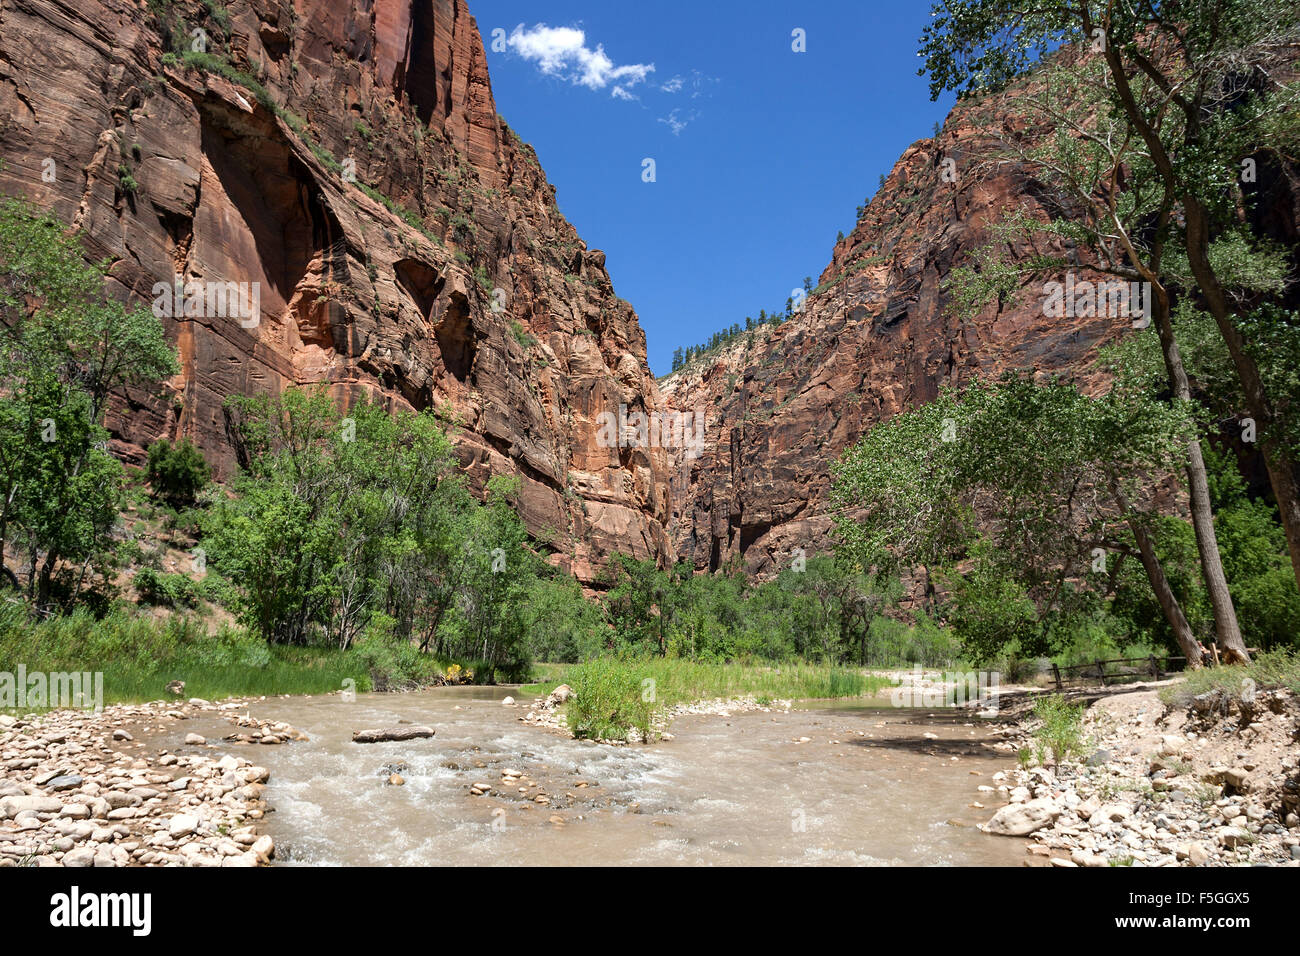 North Fork Virgin River, Riverside Walk, vertical cliff faces of Zion Canyon left and right, Zion National Park, Utah, USA Stock Photo